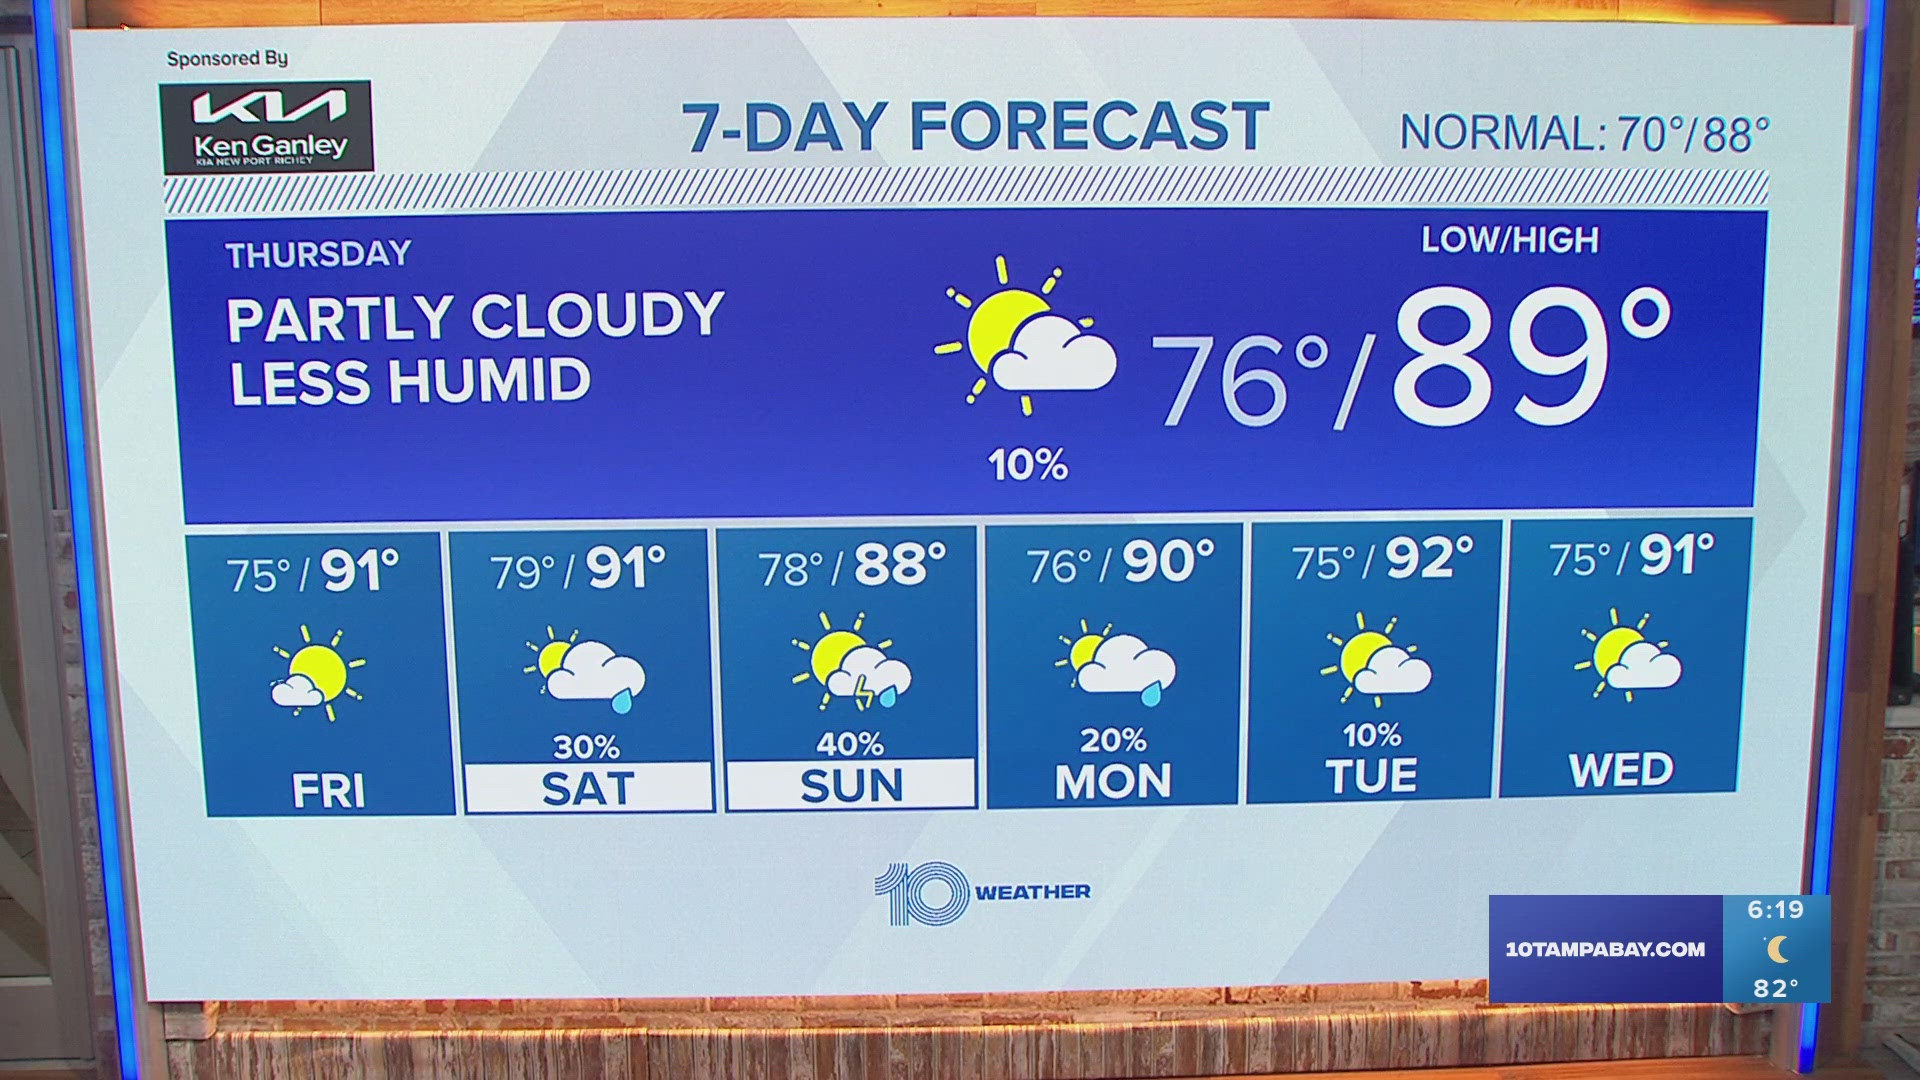 10 Tampa Bay meteorologist Natalie Ferrari has the latest forecast for the greater Tampa Bay area.